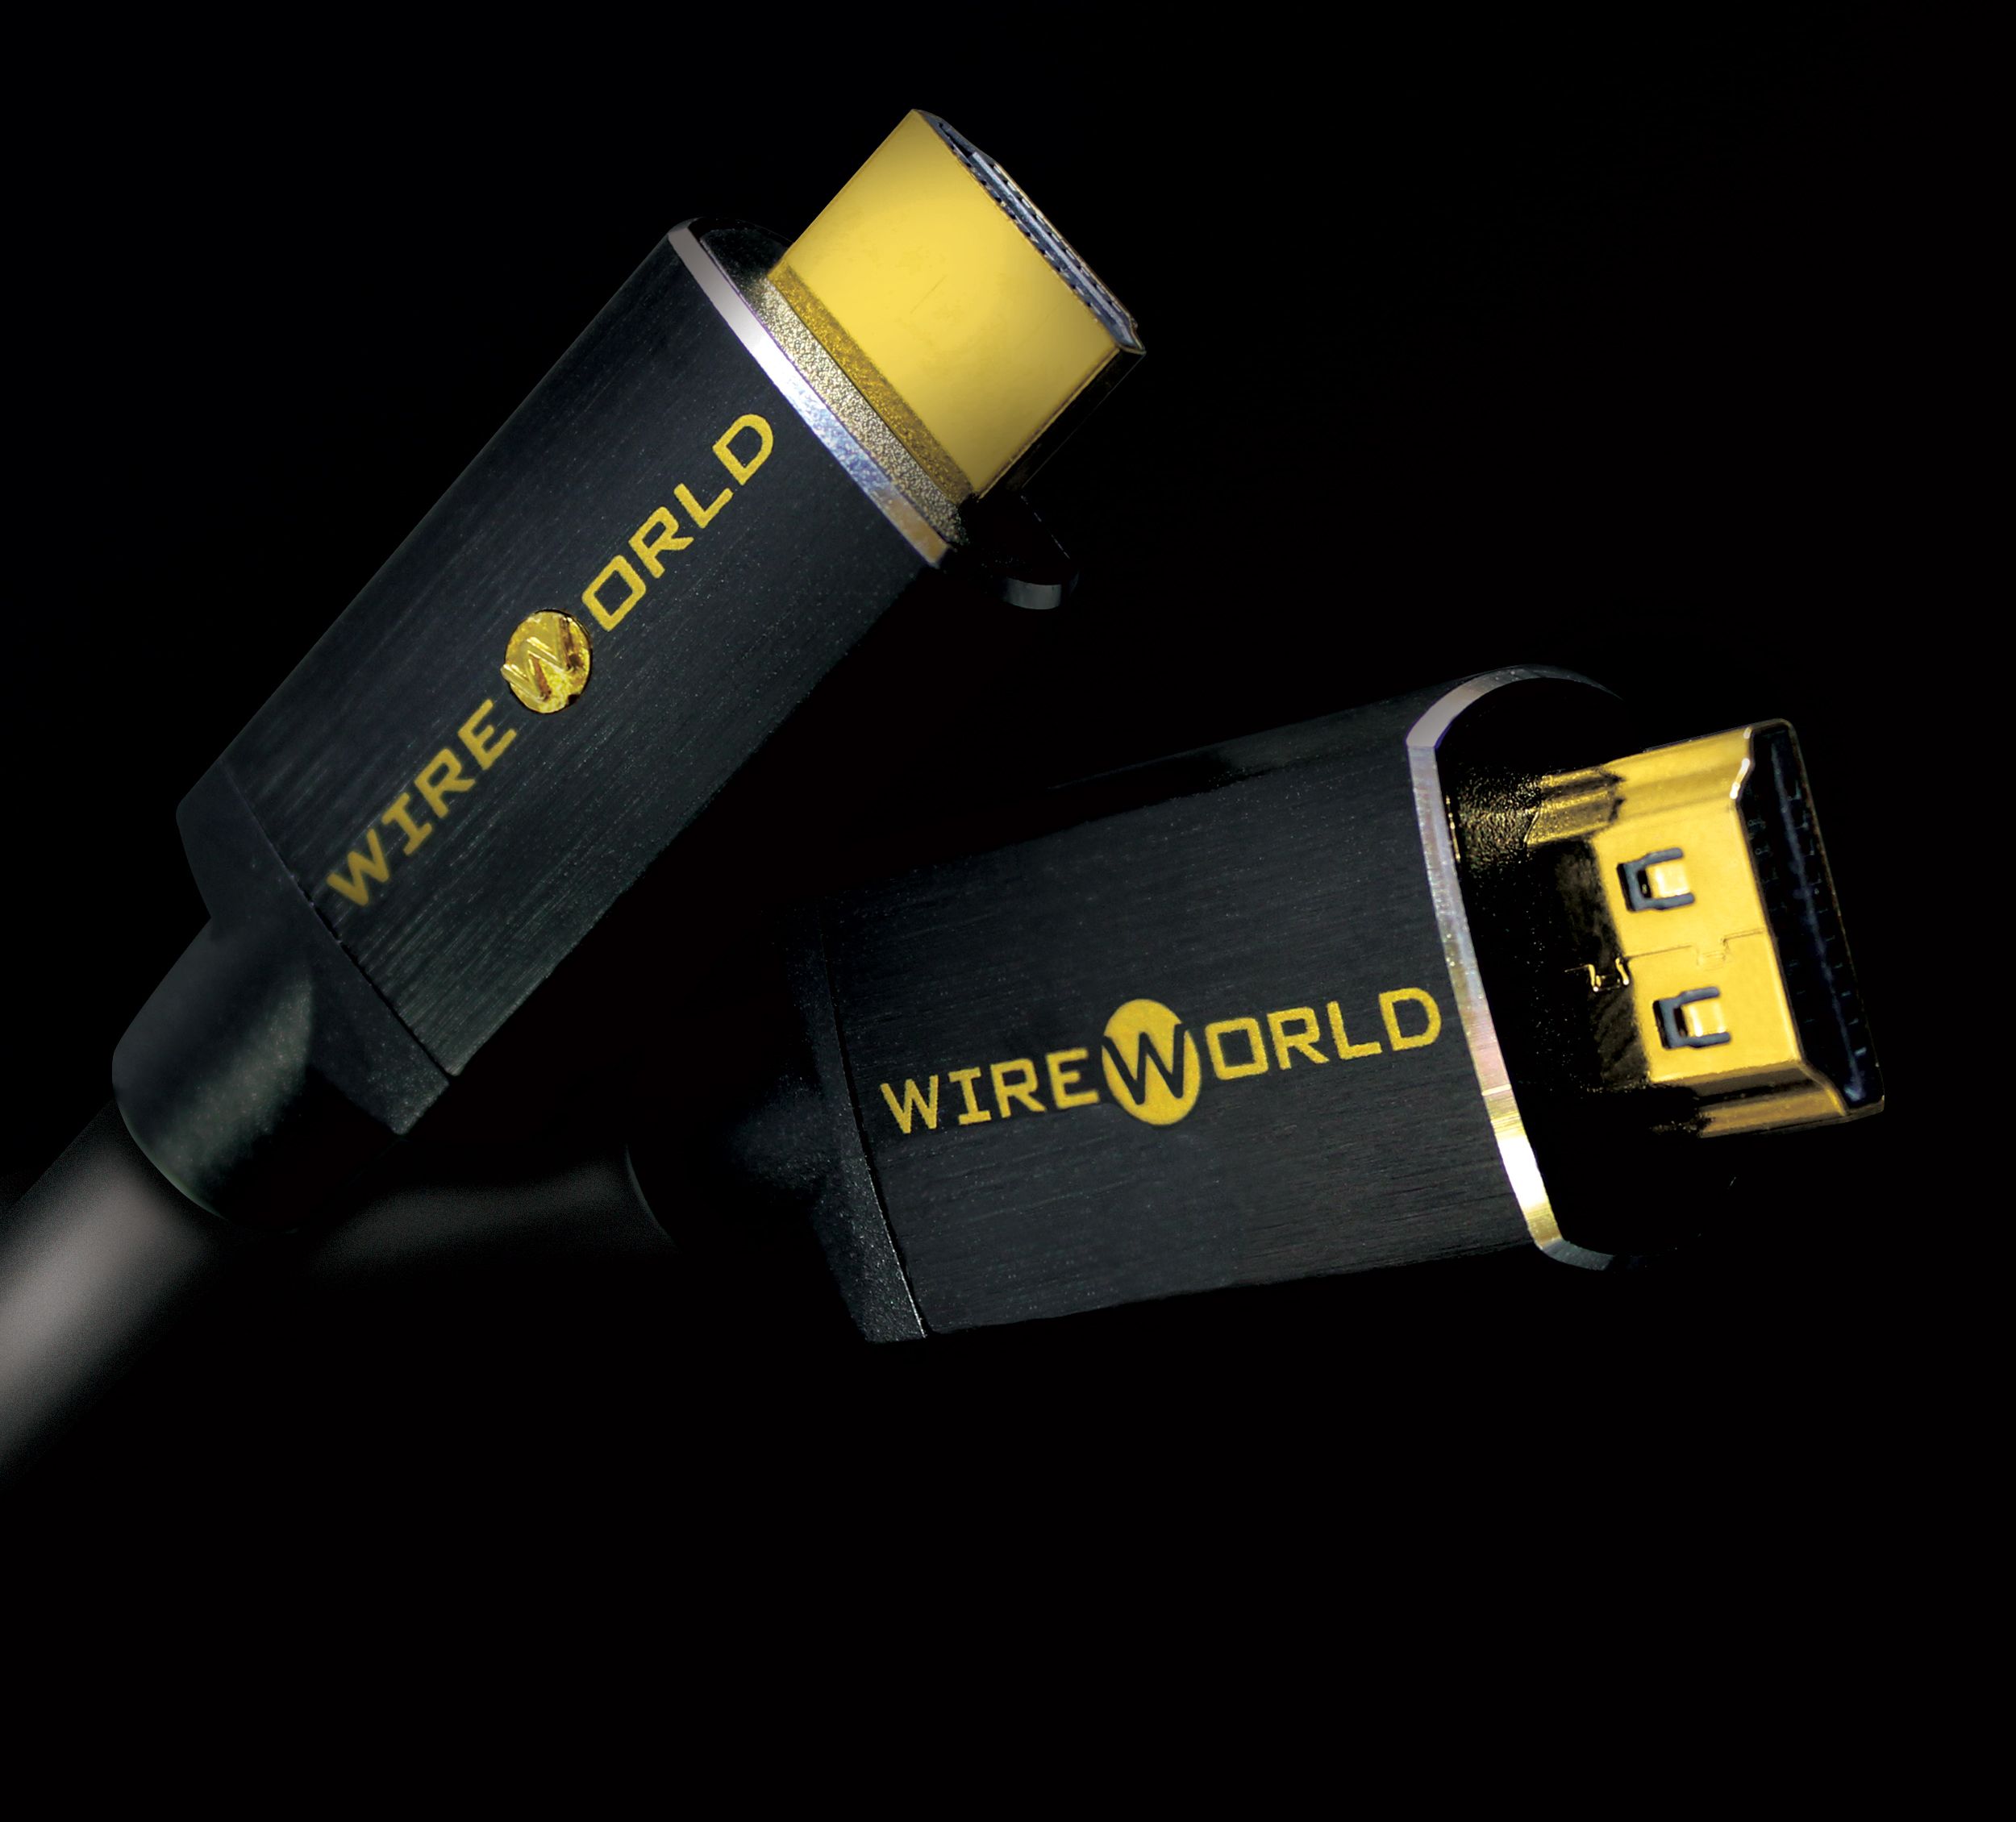 Silver Sphere HDMI cable on black background